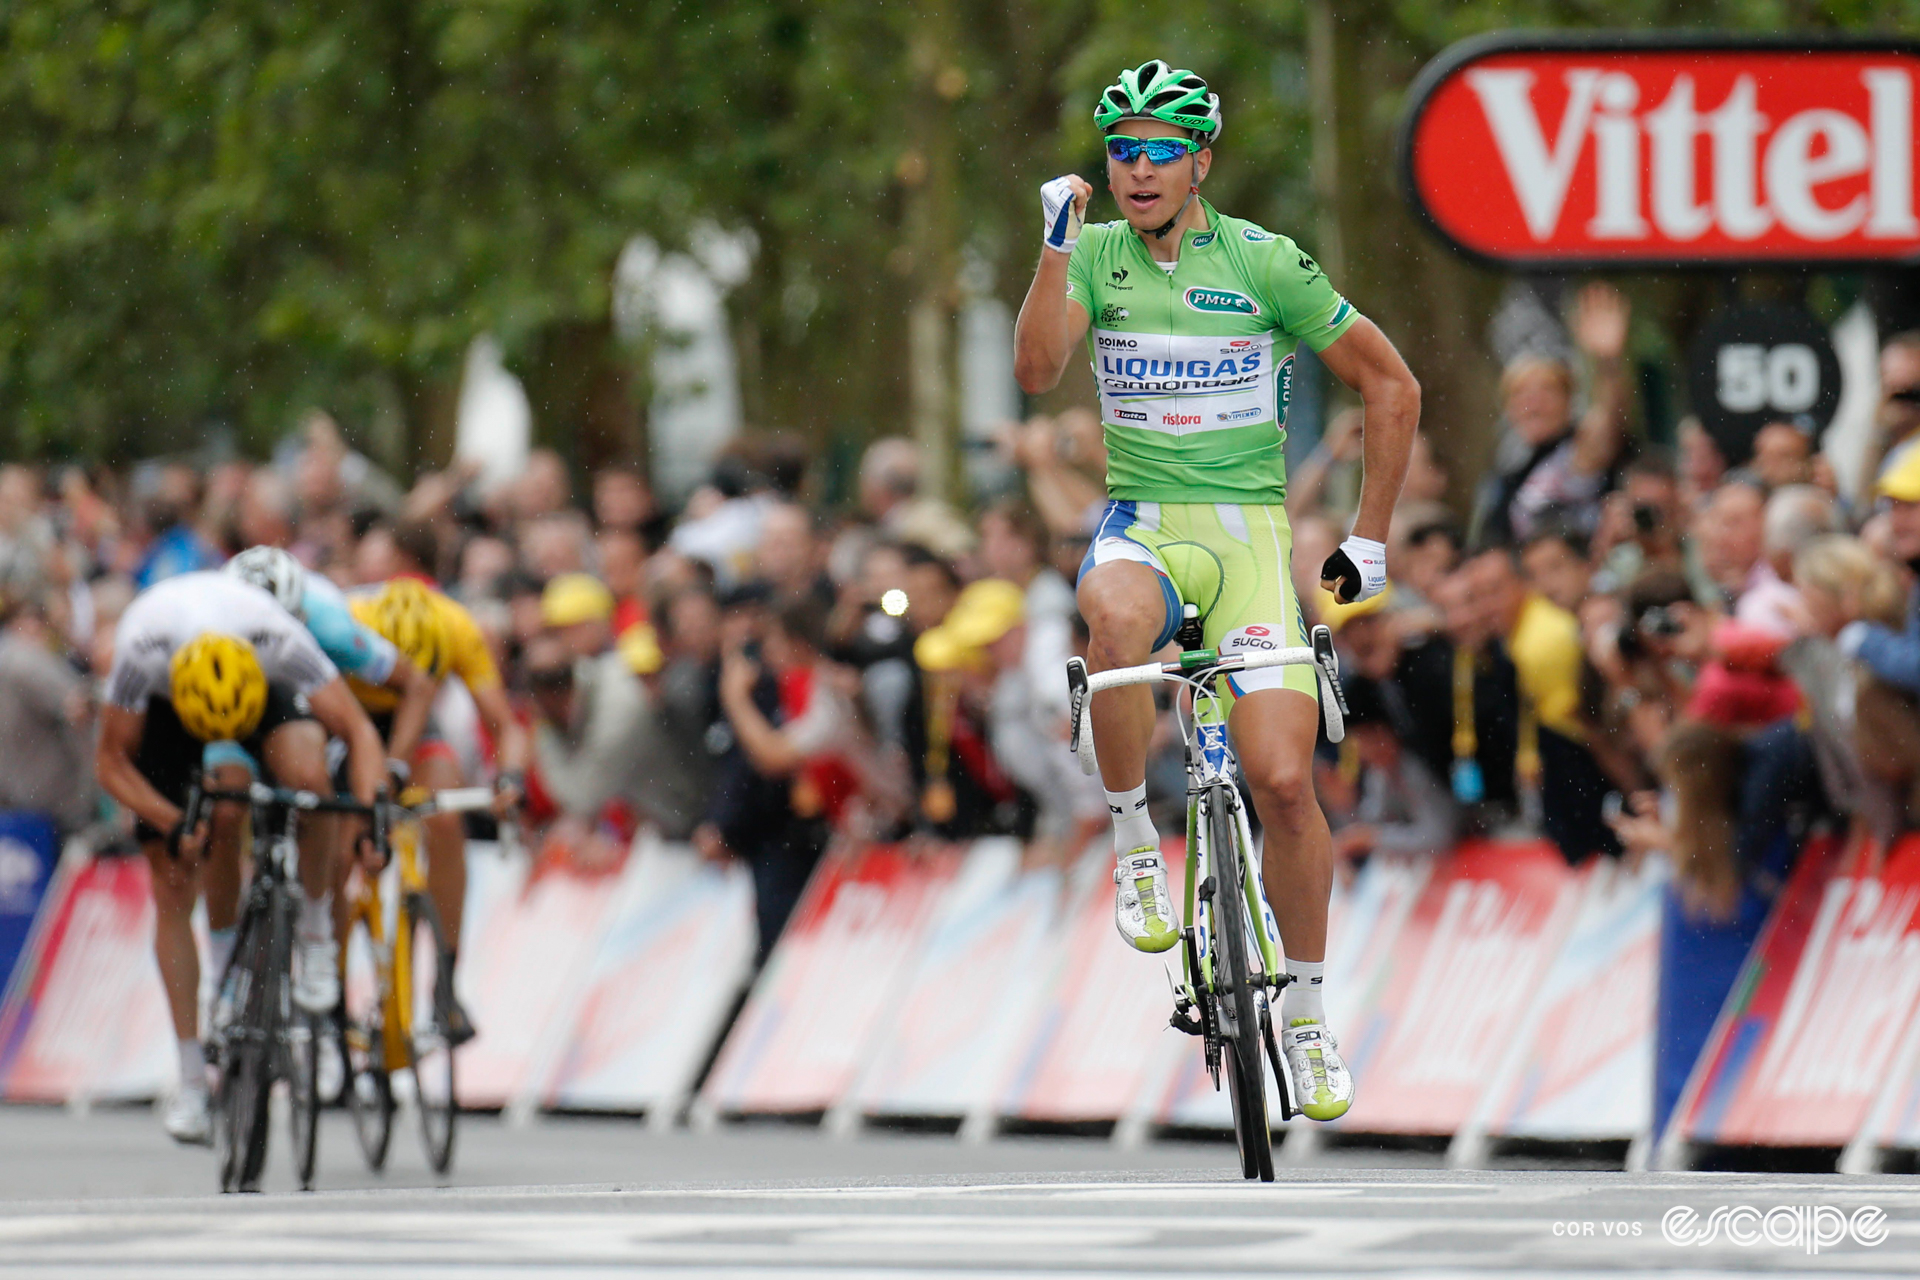 Peter Sagan celebrates winning a stage at the 2012 Tour de France with a 'running man' salute.